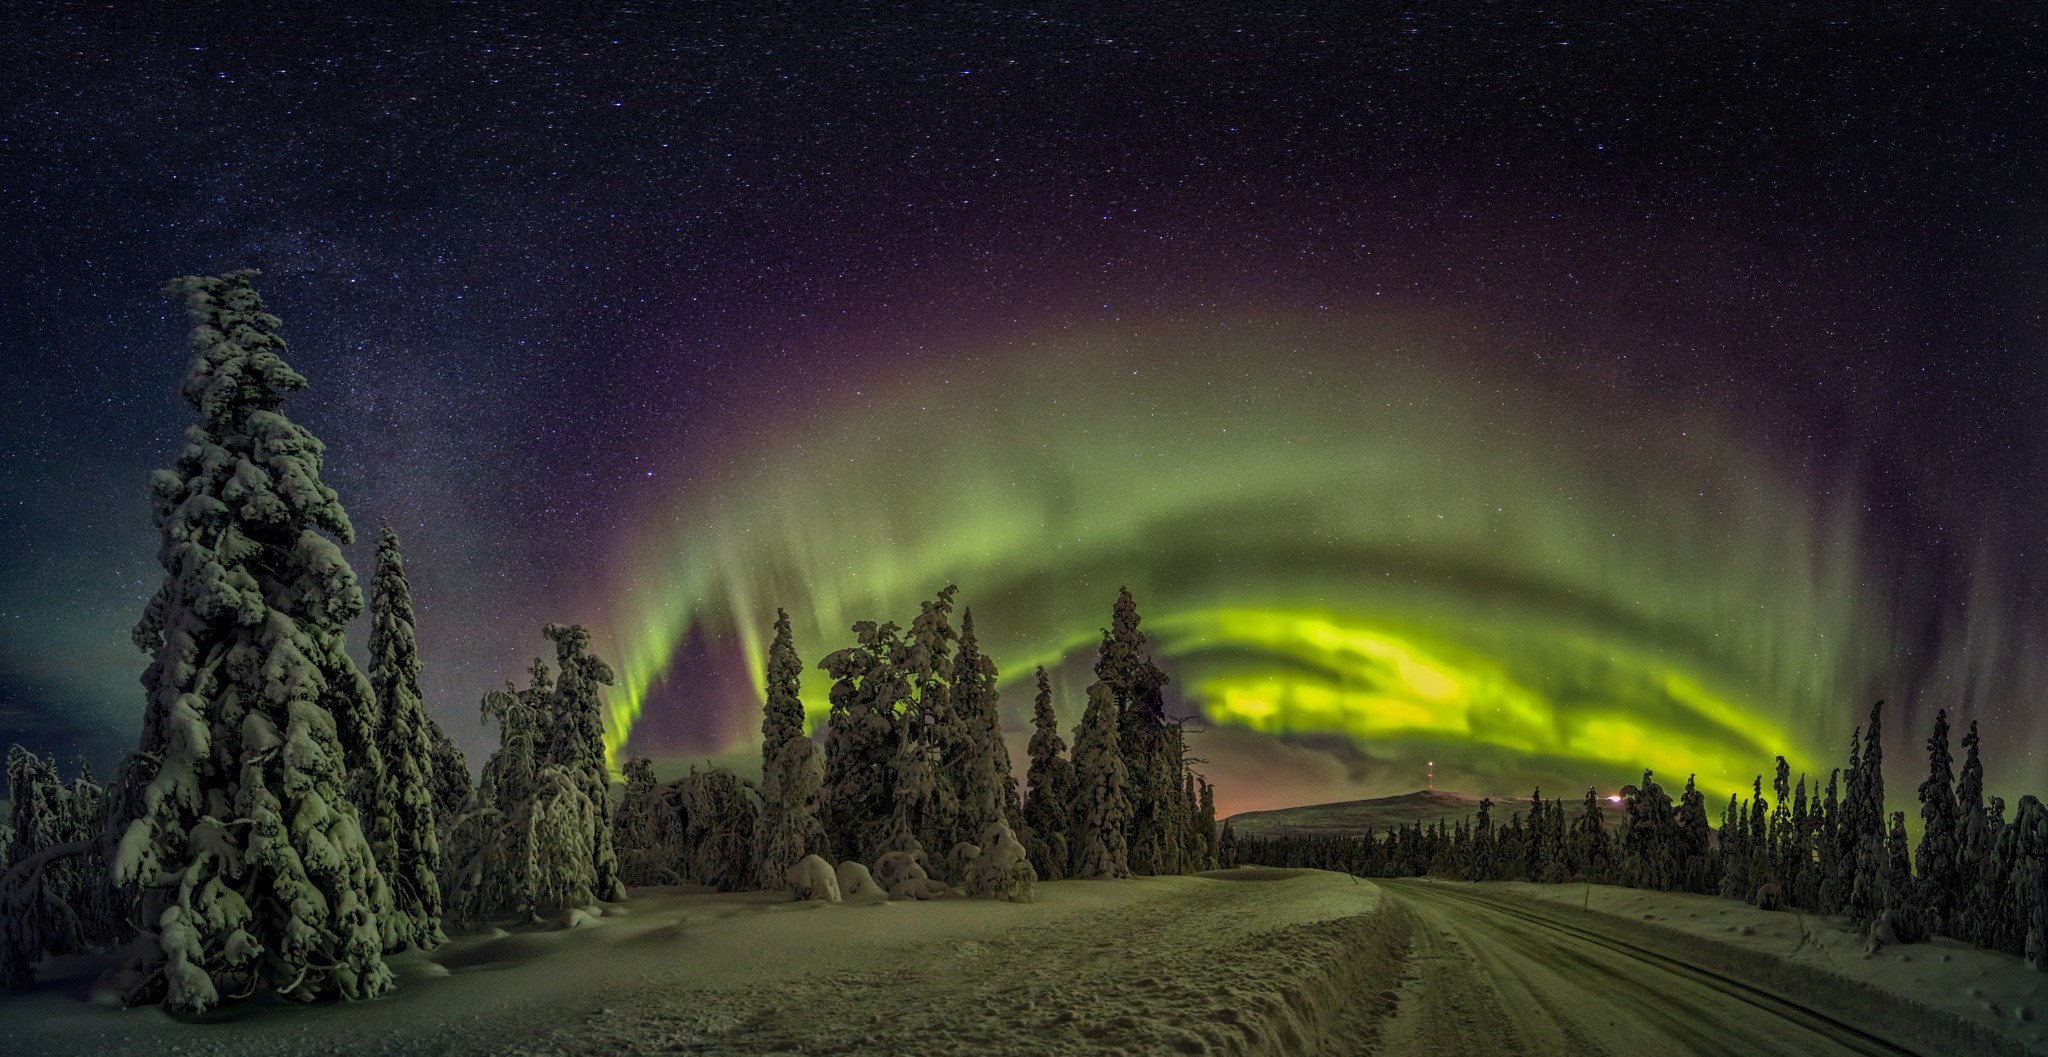 General 2048x1057 nature landscape Finland aurorae winter forest snow road lights starry night cold trees nordic landscapes